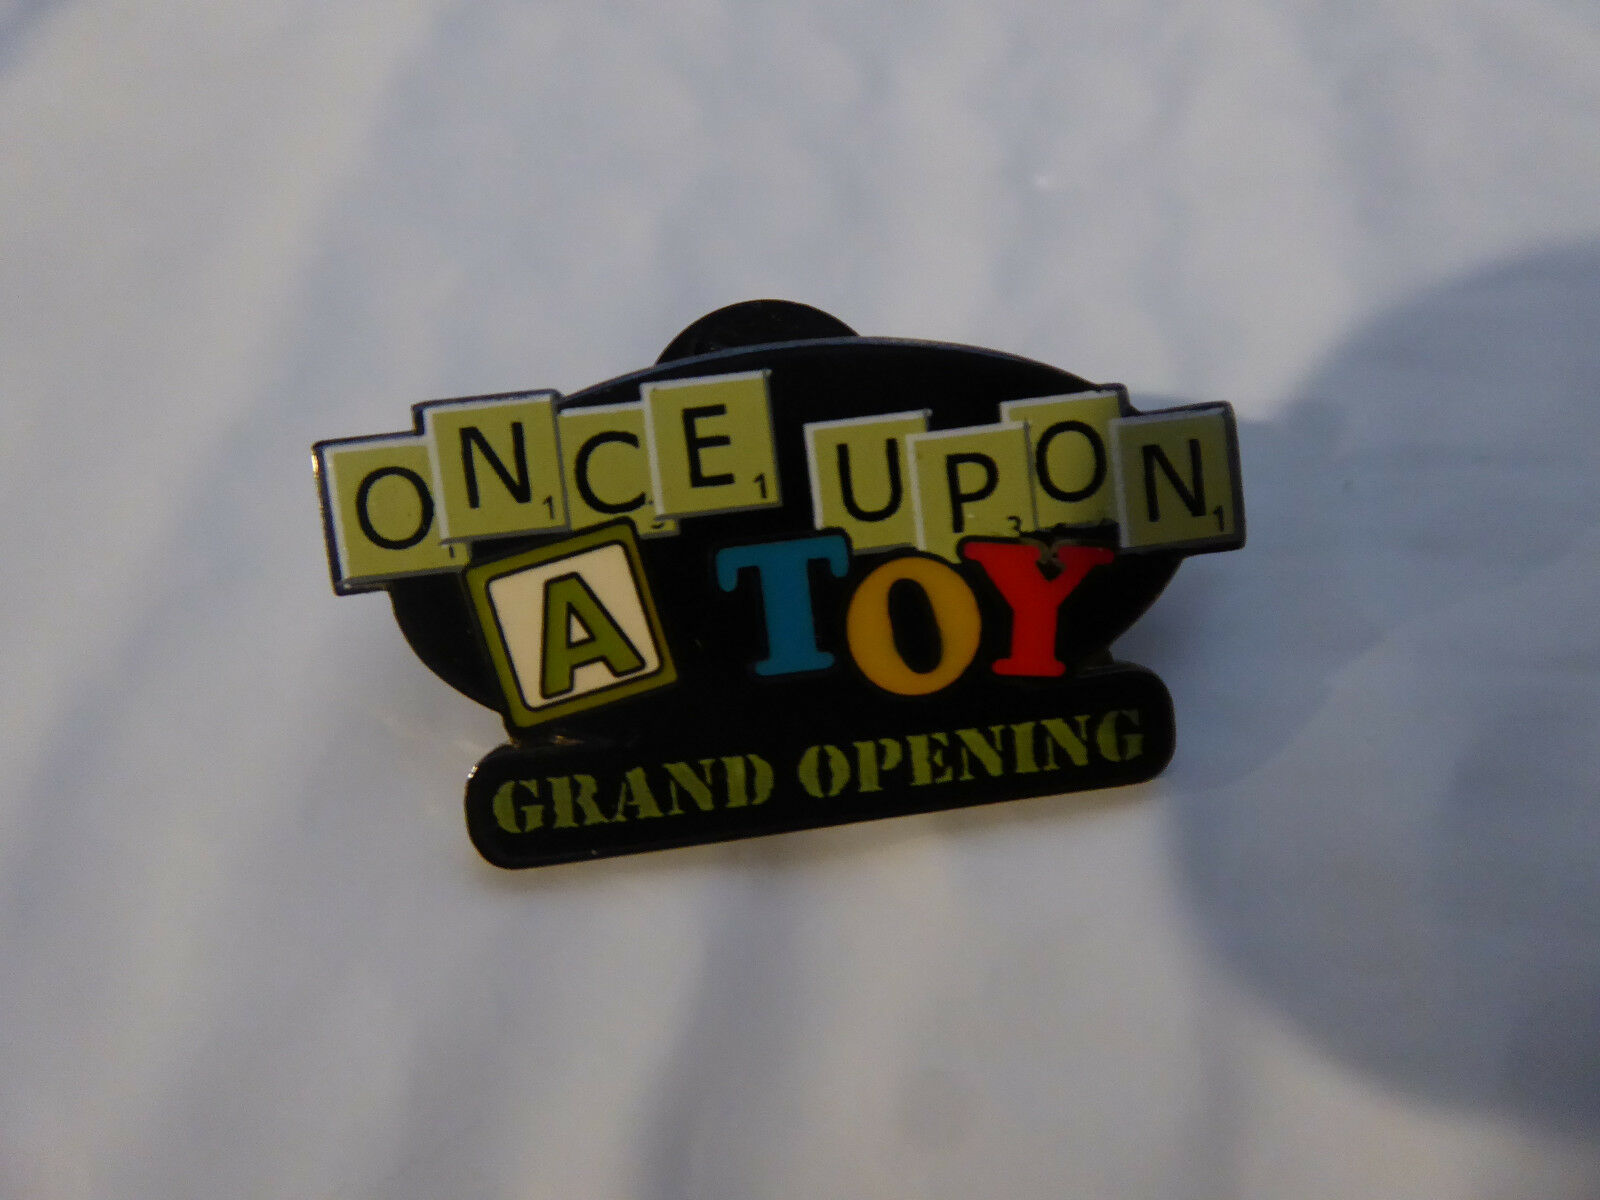 Primary image for Disney Trading Pins 13508 WDW Downtown Disney - Once Upon A Toy (Grand Opening)